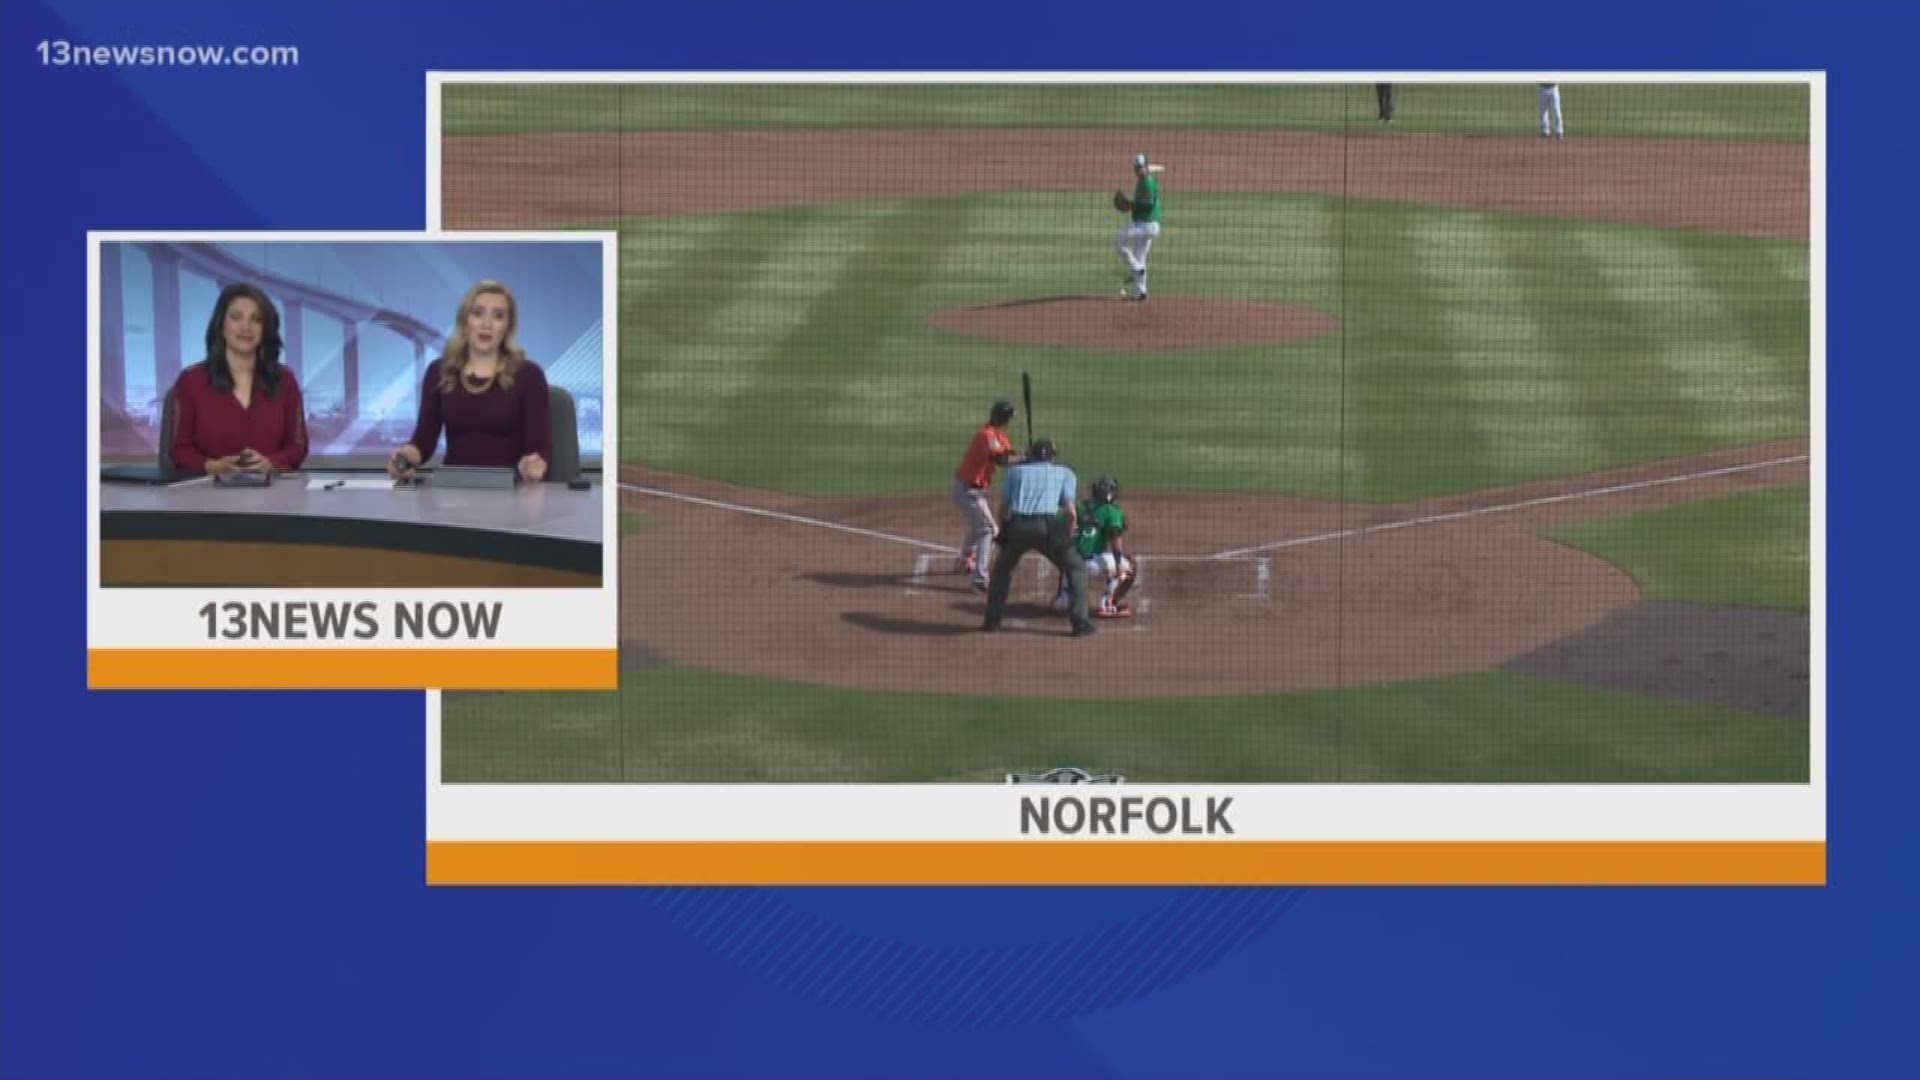 The Norfolk Tides are set to play against the Baltimore Orioles in an exhibition game at Harbor Park on Monday, March 26.